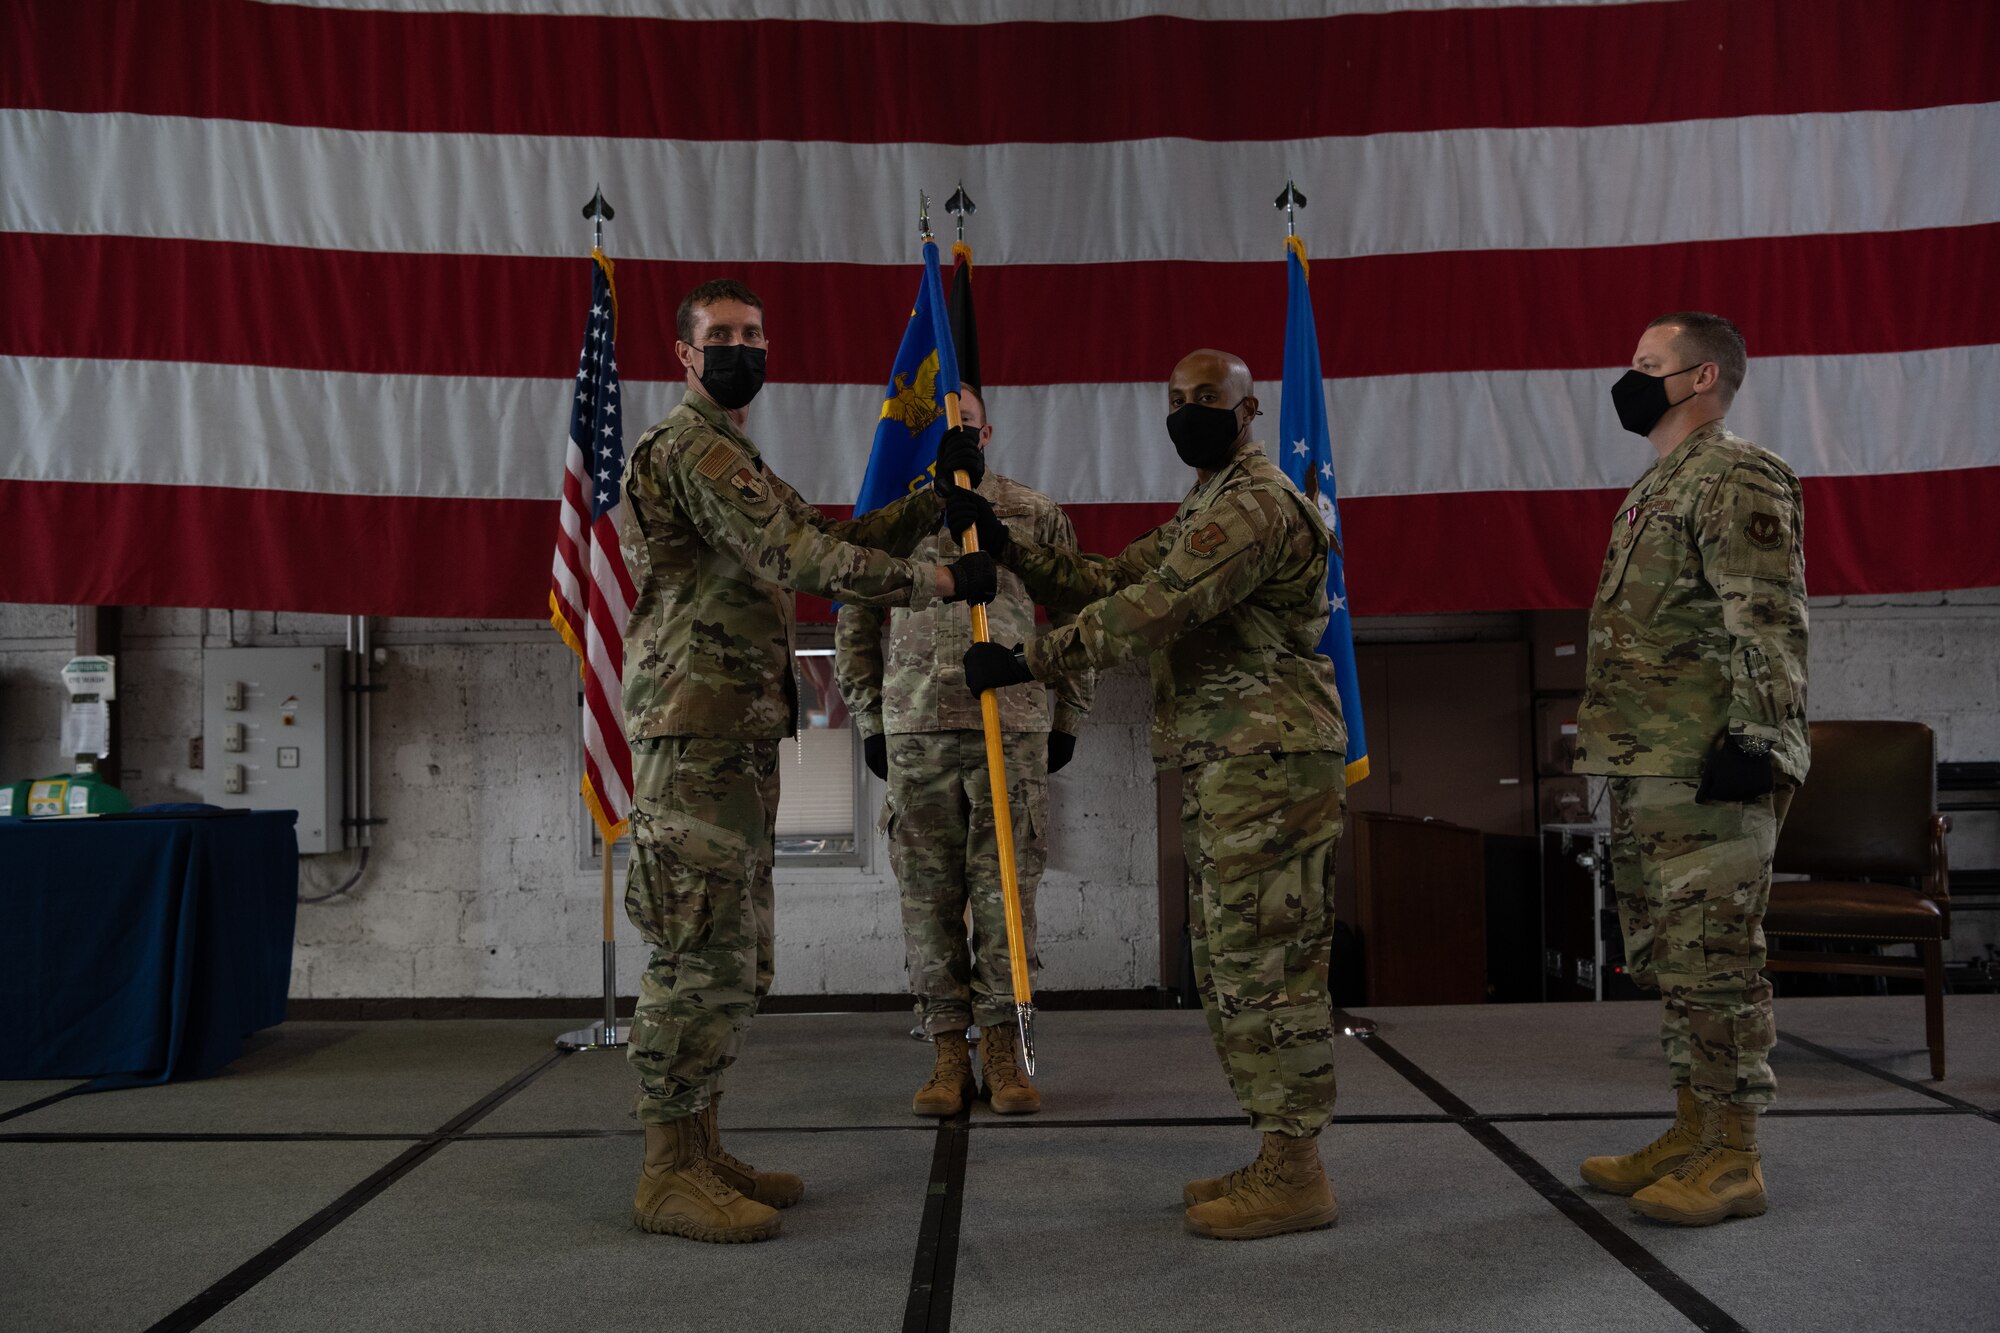 U.S. Air Force Col. David Epperson, 52nd Fighter Wing commander (left), passes the 52nd Comptroller Squadron guidon to Maj. Lee Washington, incoming 52nd CPTS commander, at the 52nd CPTS change of command ceremony at Spangdahlem Air Base, June 30, 2021. The commander of the comptroller squadron also is responsible for overseeing the Wing Staff Agencies, which encompasses many flights such as Command Post, Public Affairs and the base legal office. (U.S. Air Force photo by Senior Airman Ali Stewart)